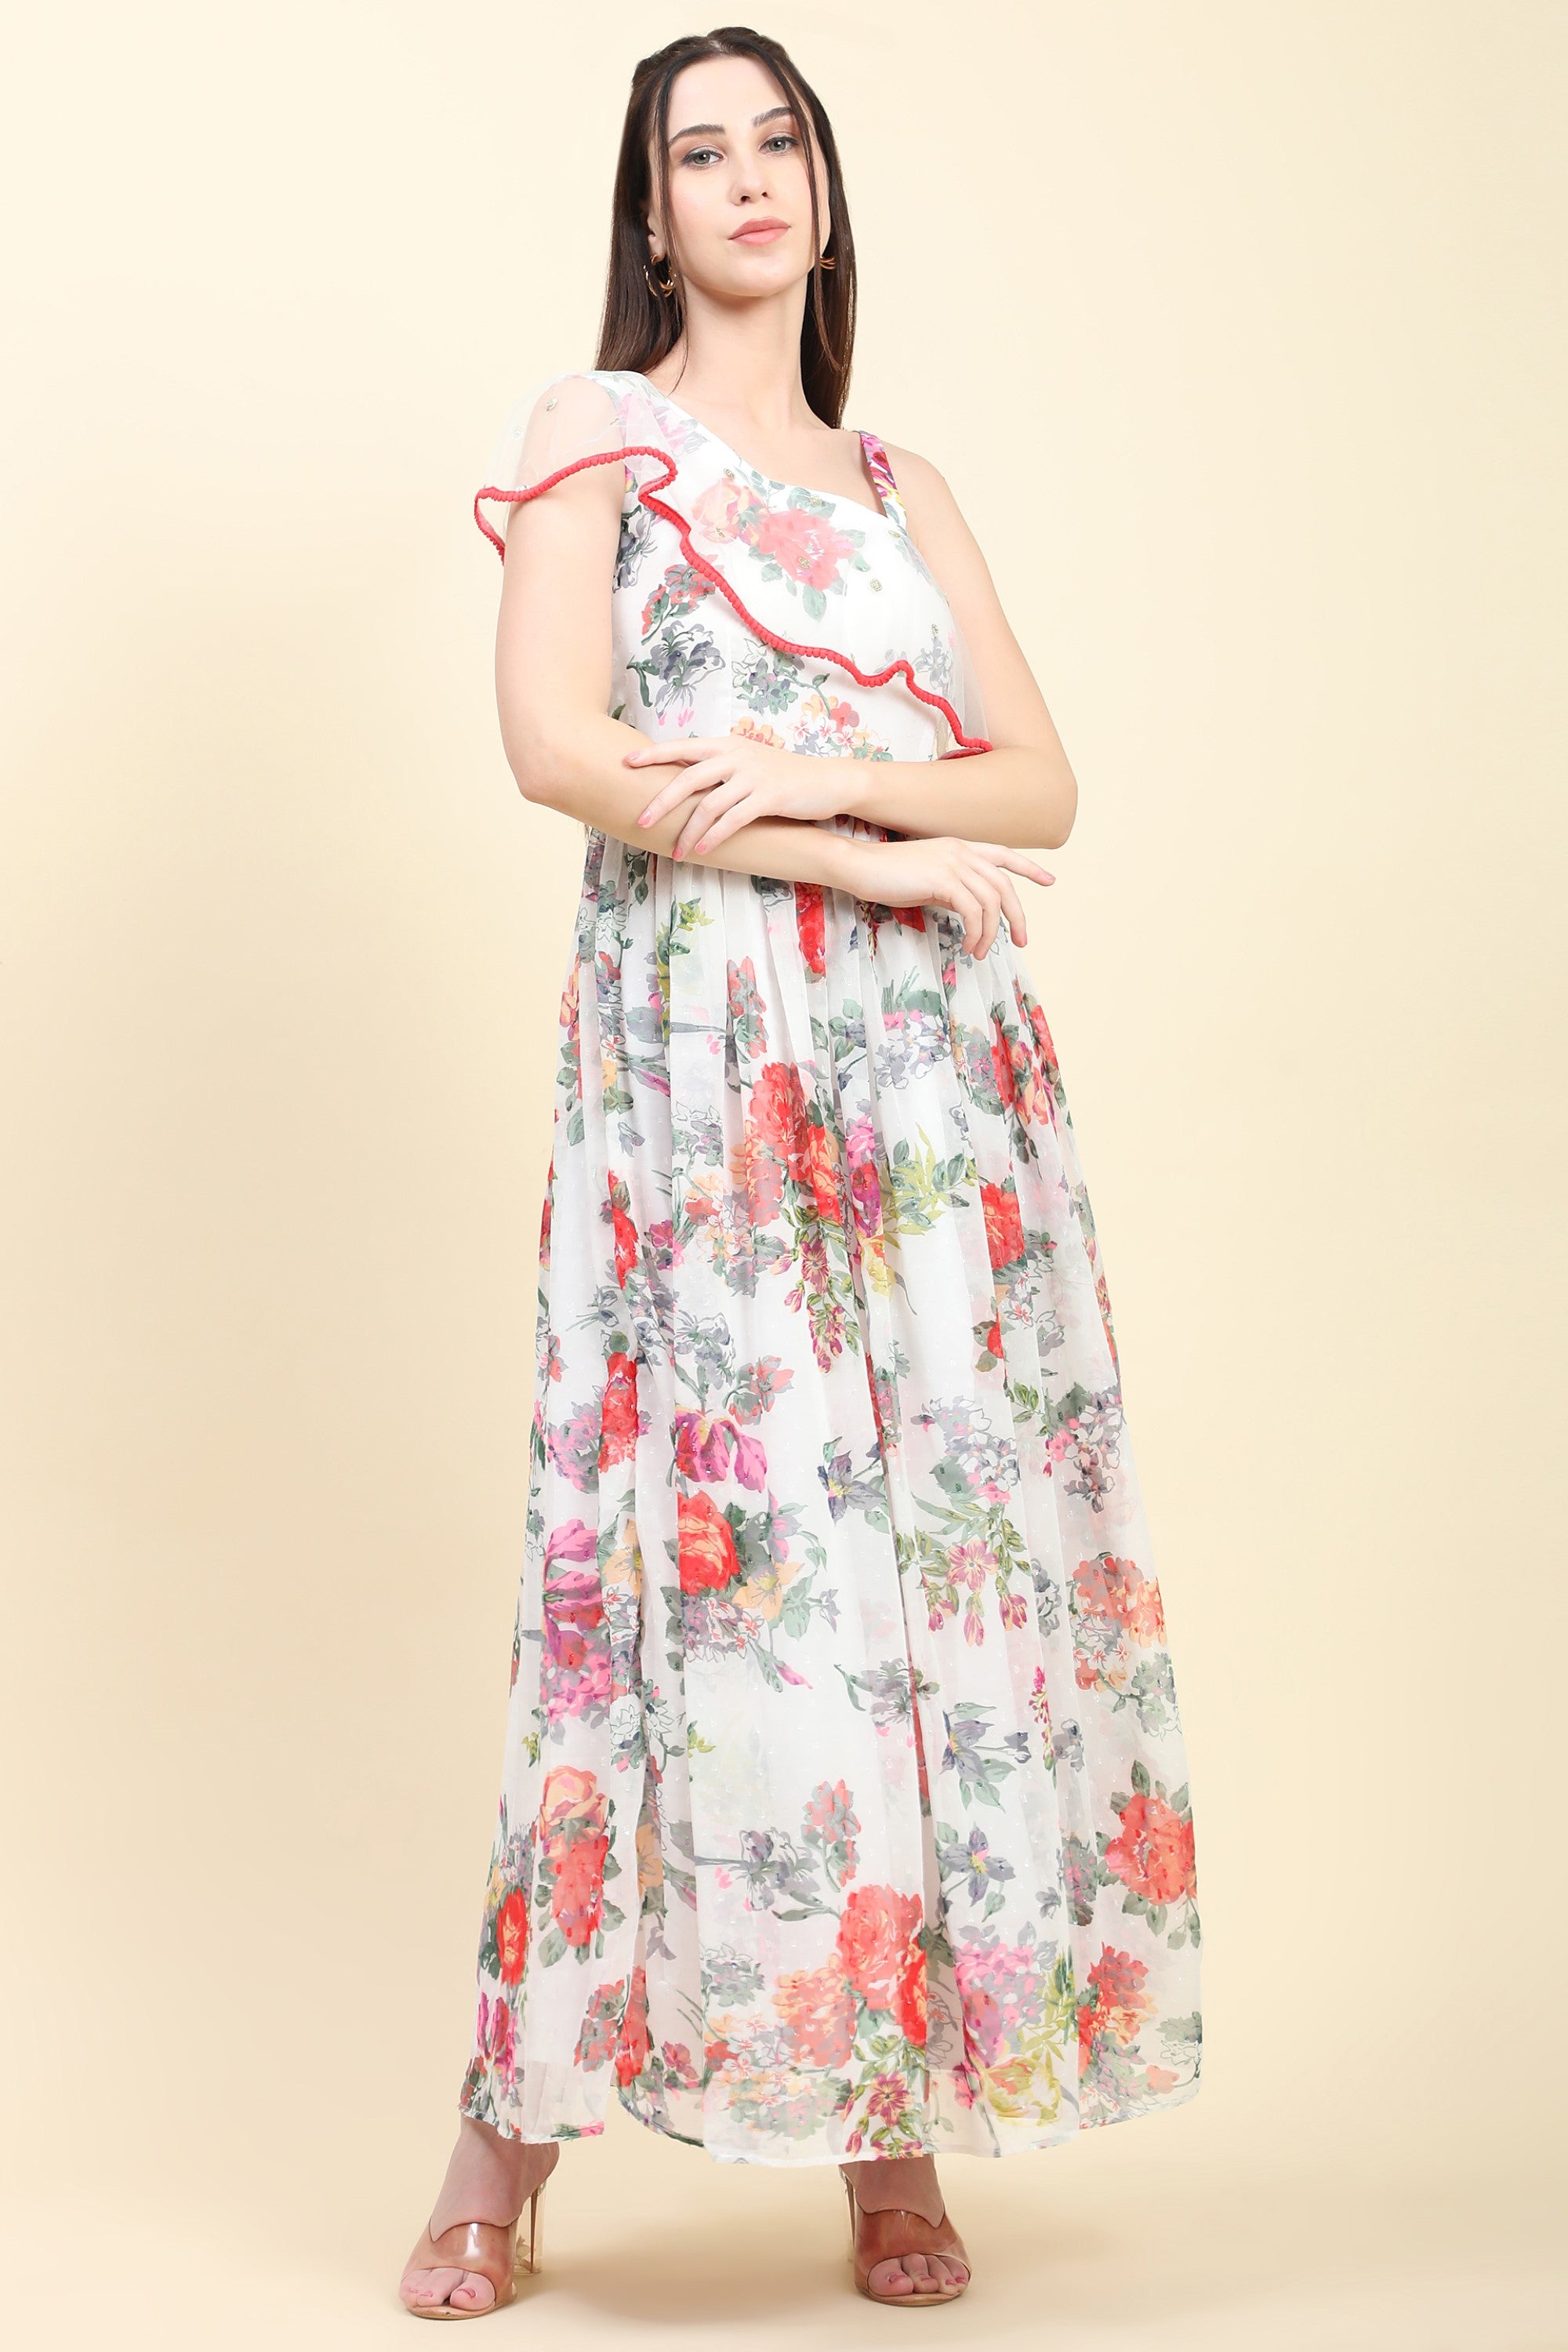 Women's One Shoulder Floral Printed Georgette Dress white base - MIRACOLOS by Ruchi